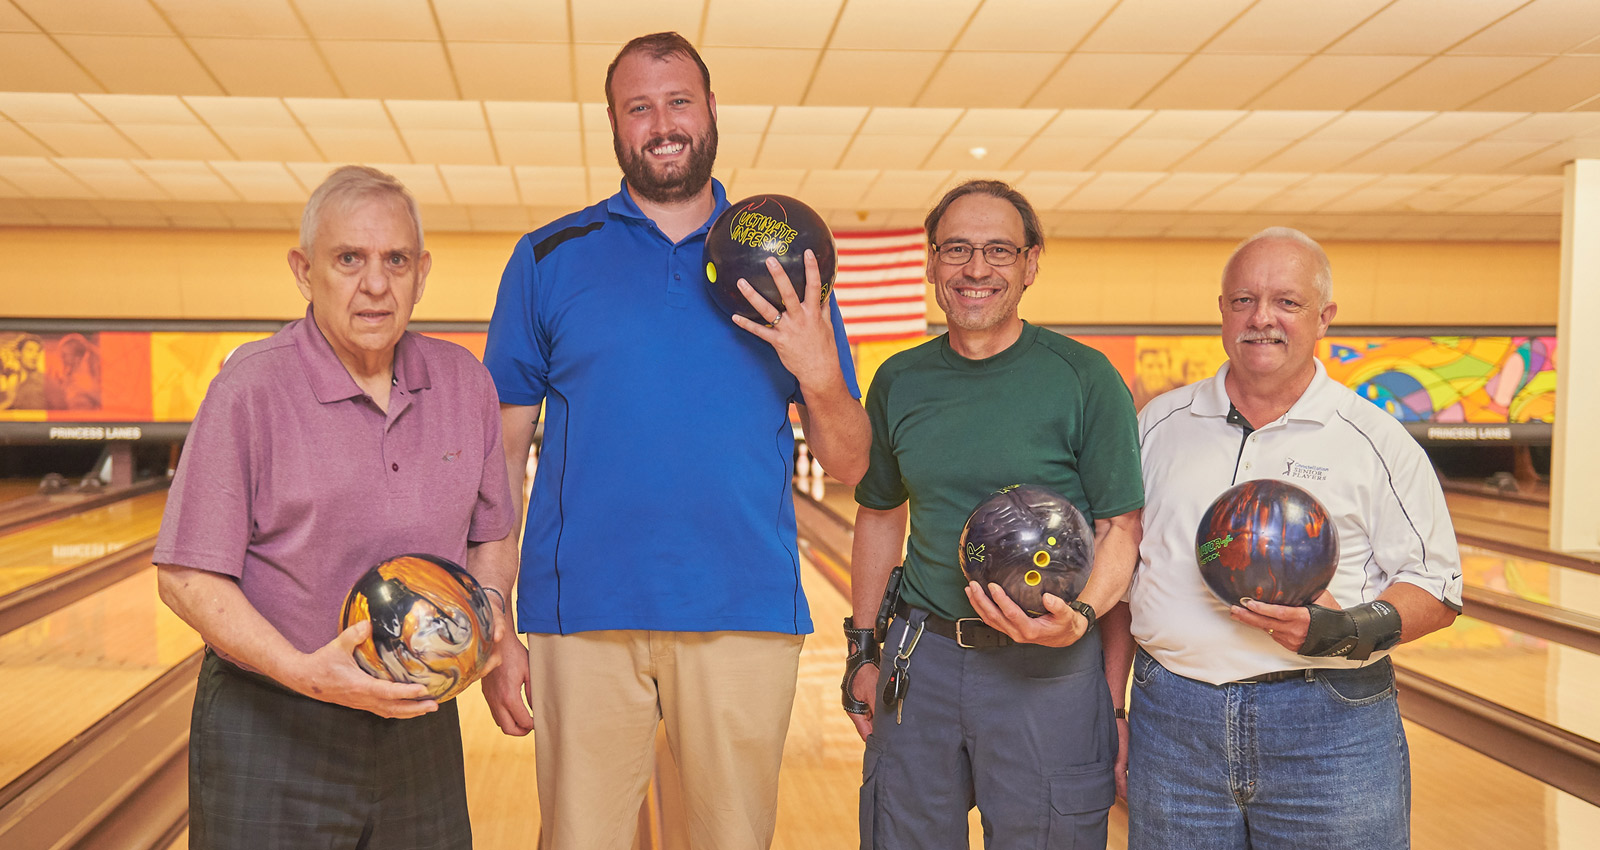 Start a bowling fundraiser at Princess Lanes in Caste Village